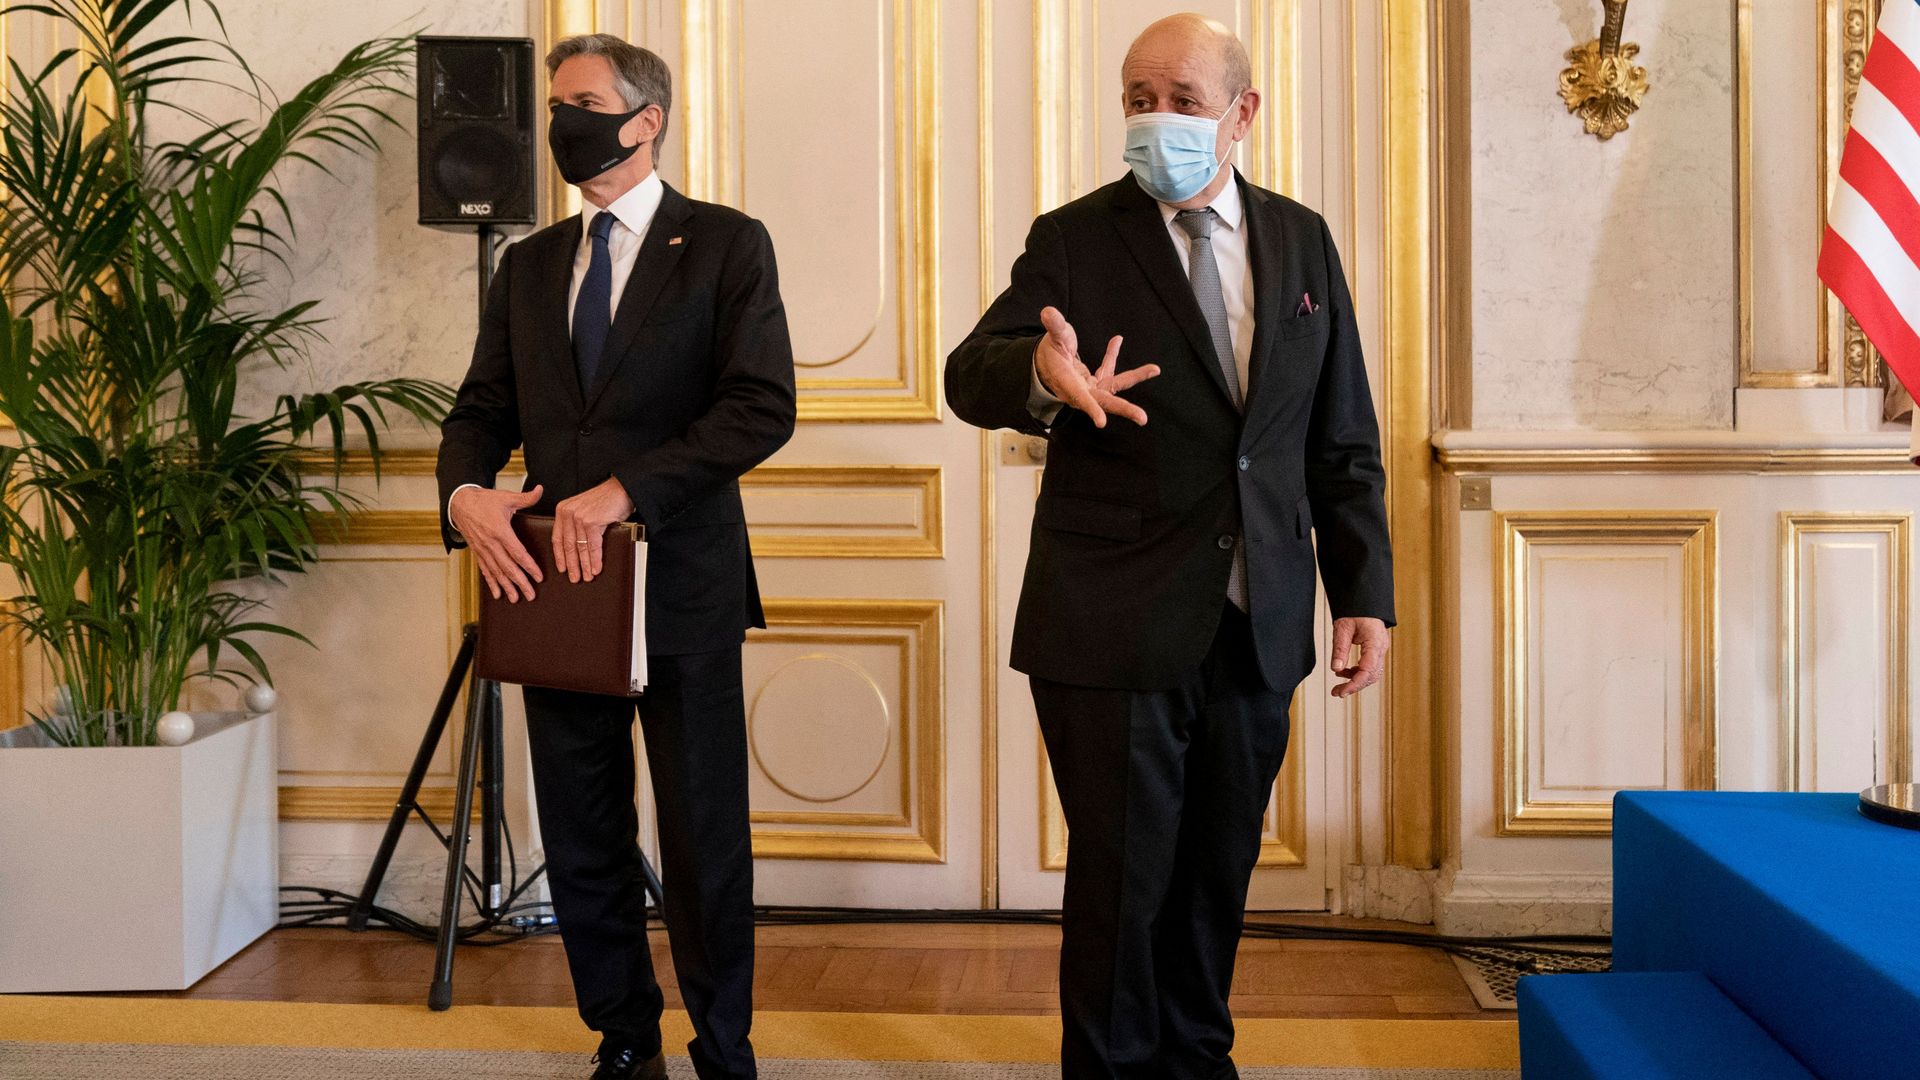 Secretary of State Antony Blinken (left) and French Foreign Affairs Minister Jean-Yves Le Drian arrive at joint press conference in June 2021.